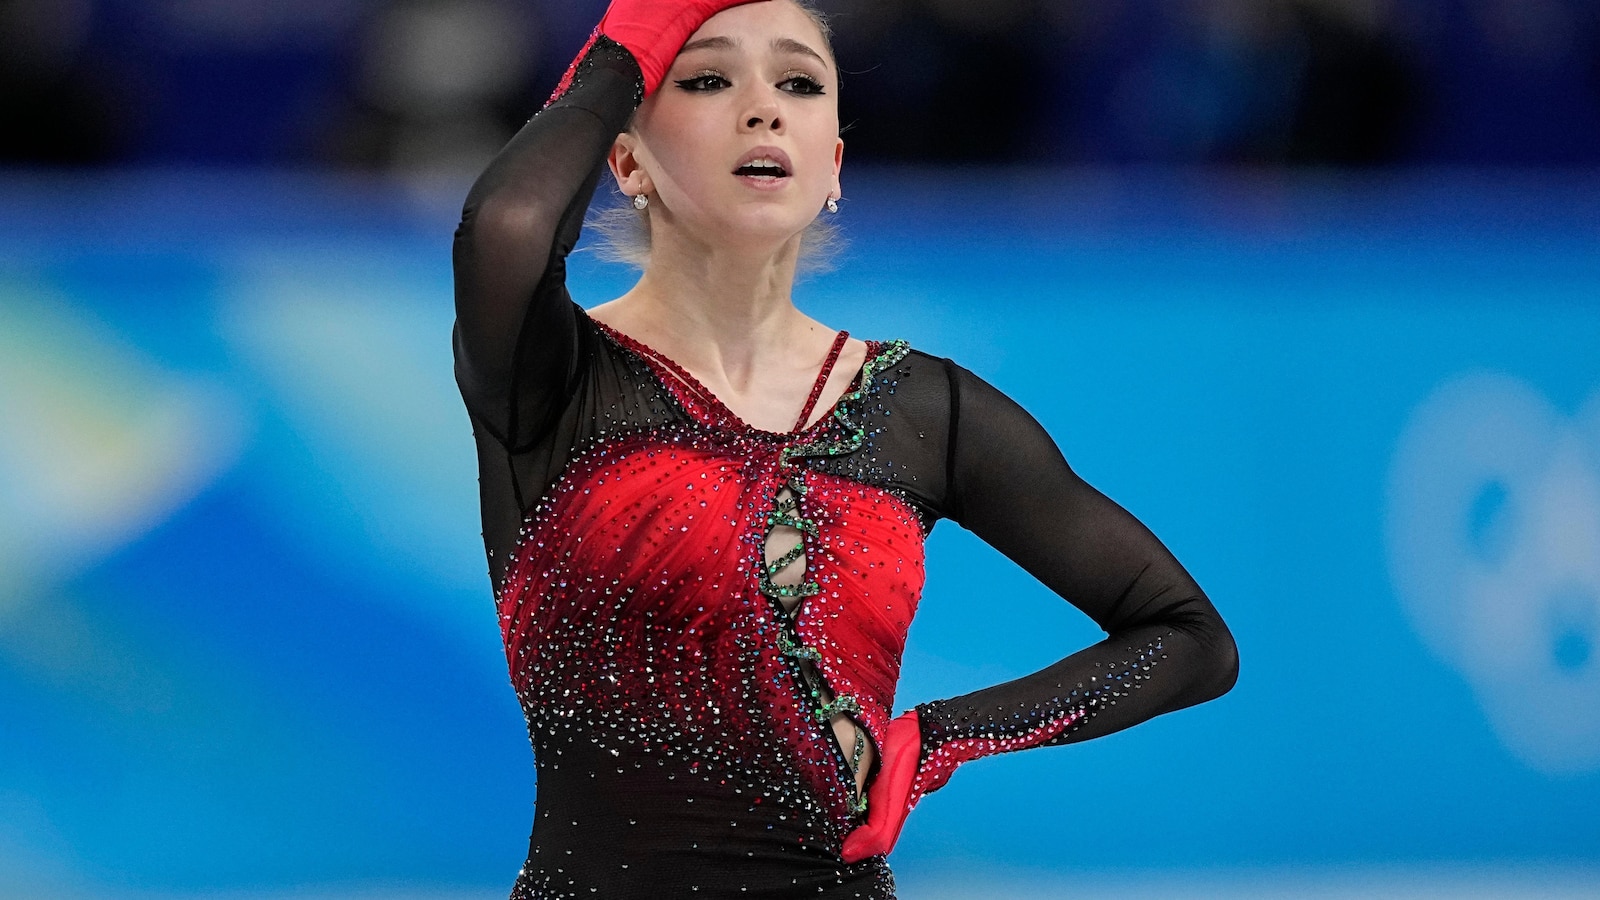 Skater Valieva's Disqualification Impacts Russian Team's Chances of Winning Gold at 2022 Olympics